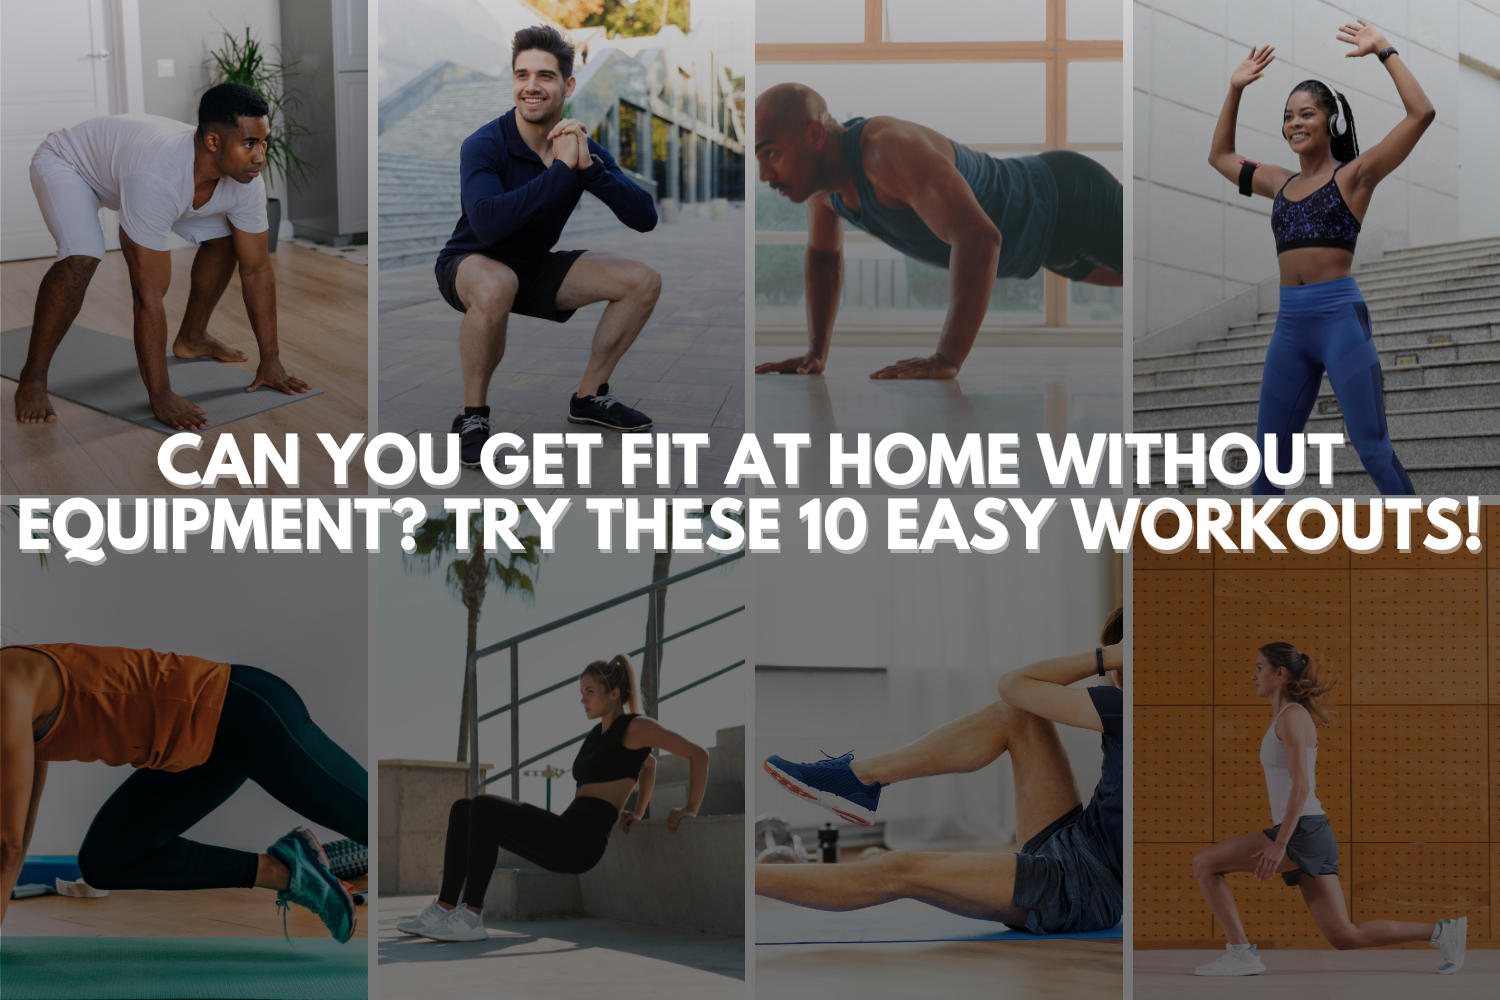 Can You Get Fit at Home Without Equipment?